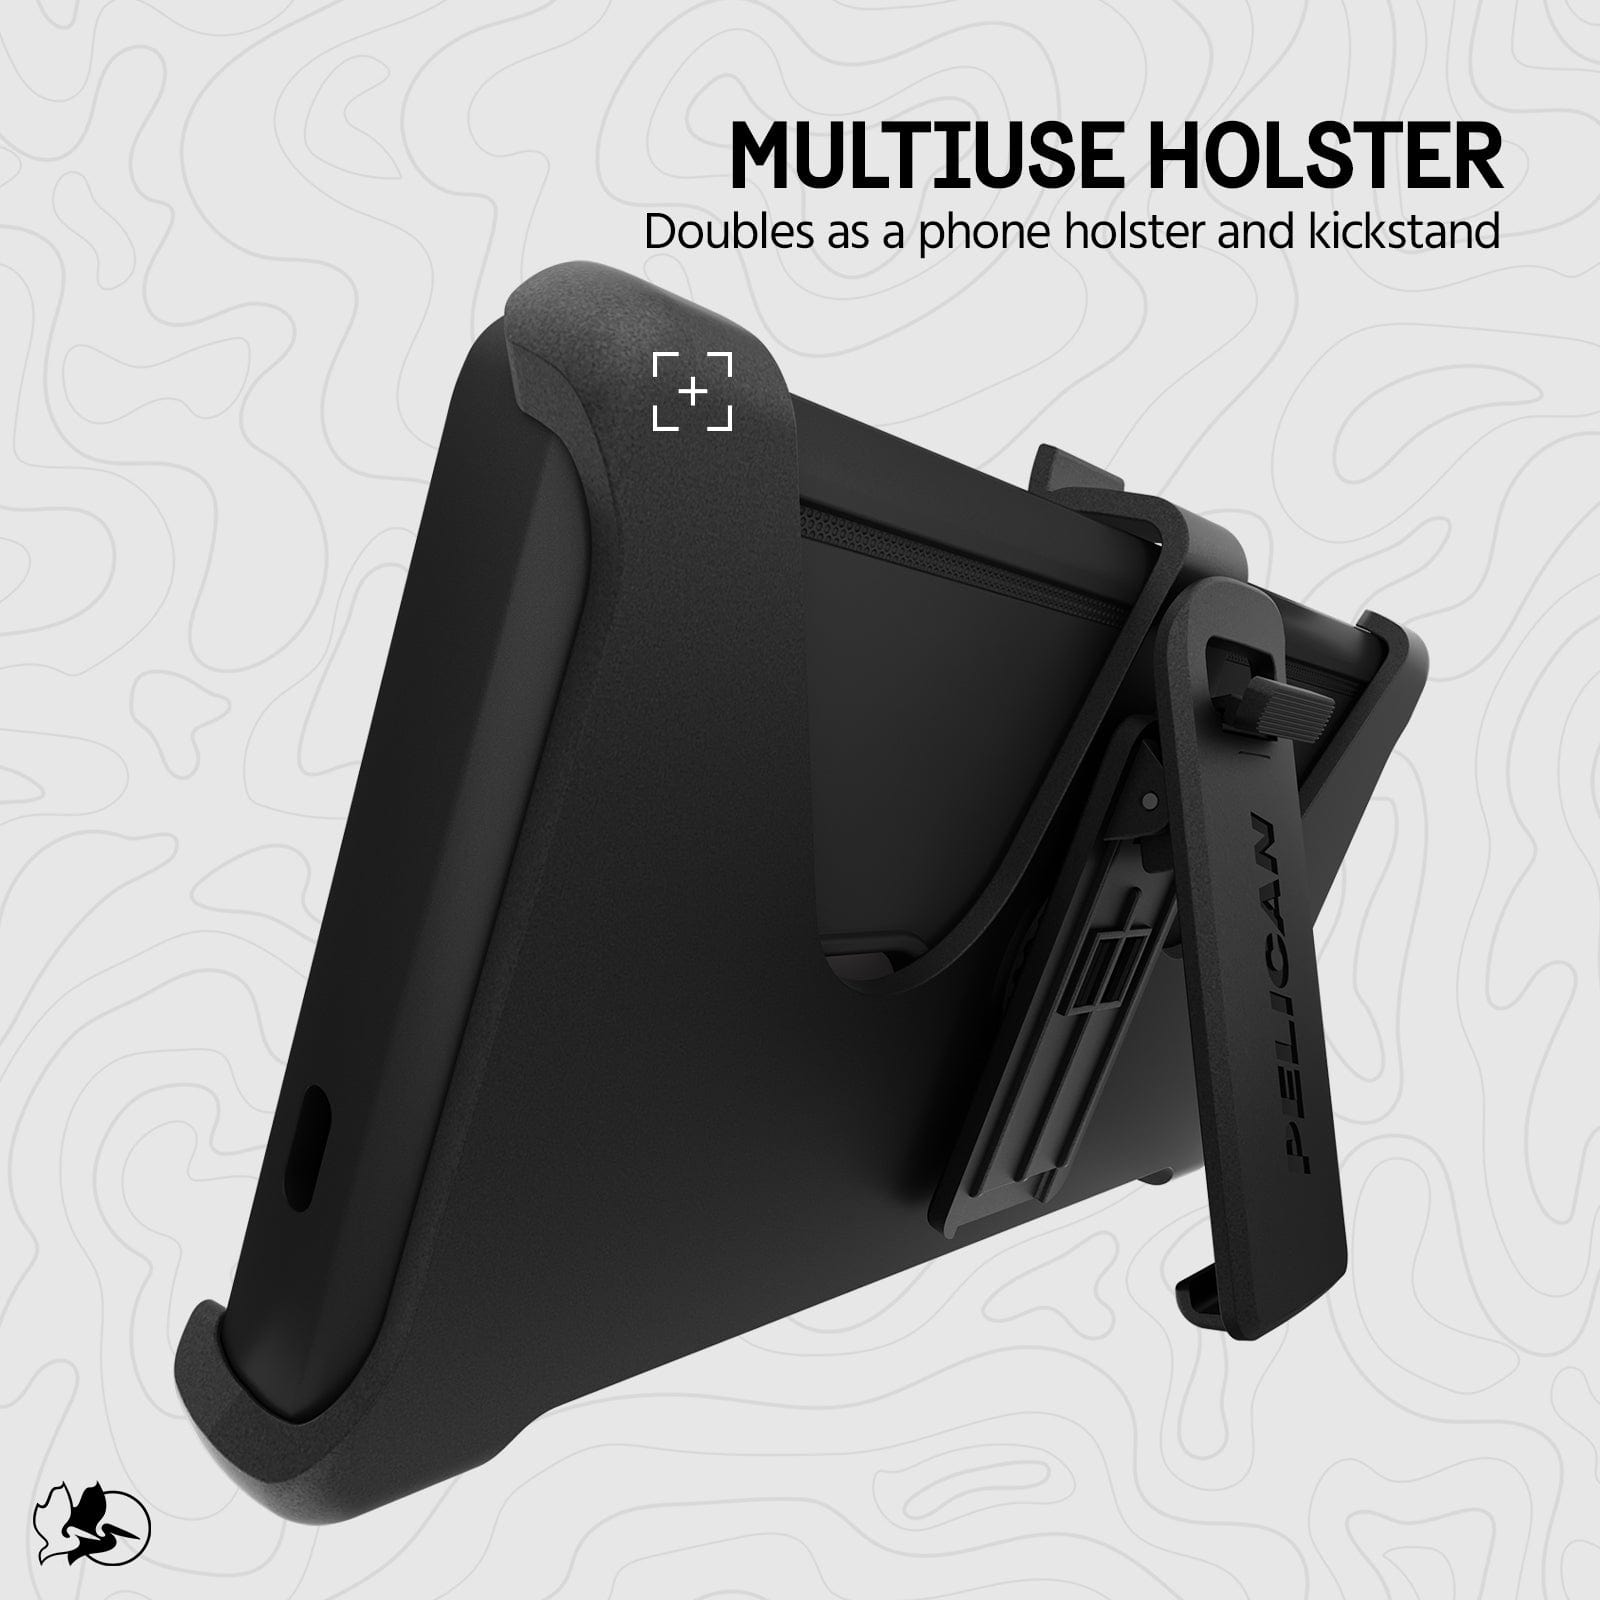 MULTIUSE HOLSTER DOUBLES AS A PHONE HOLSTER AND KICKSTAND